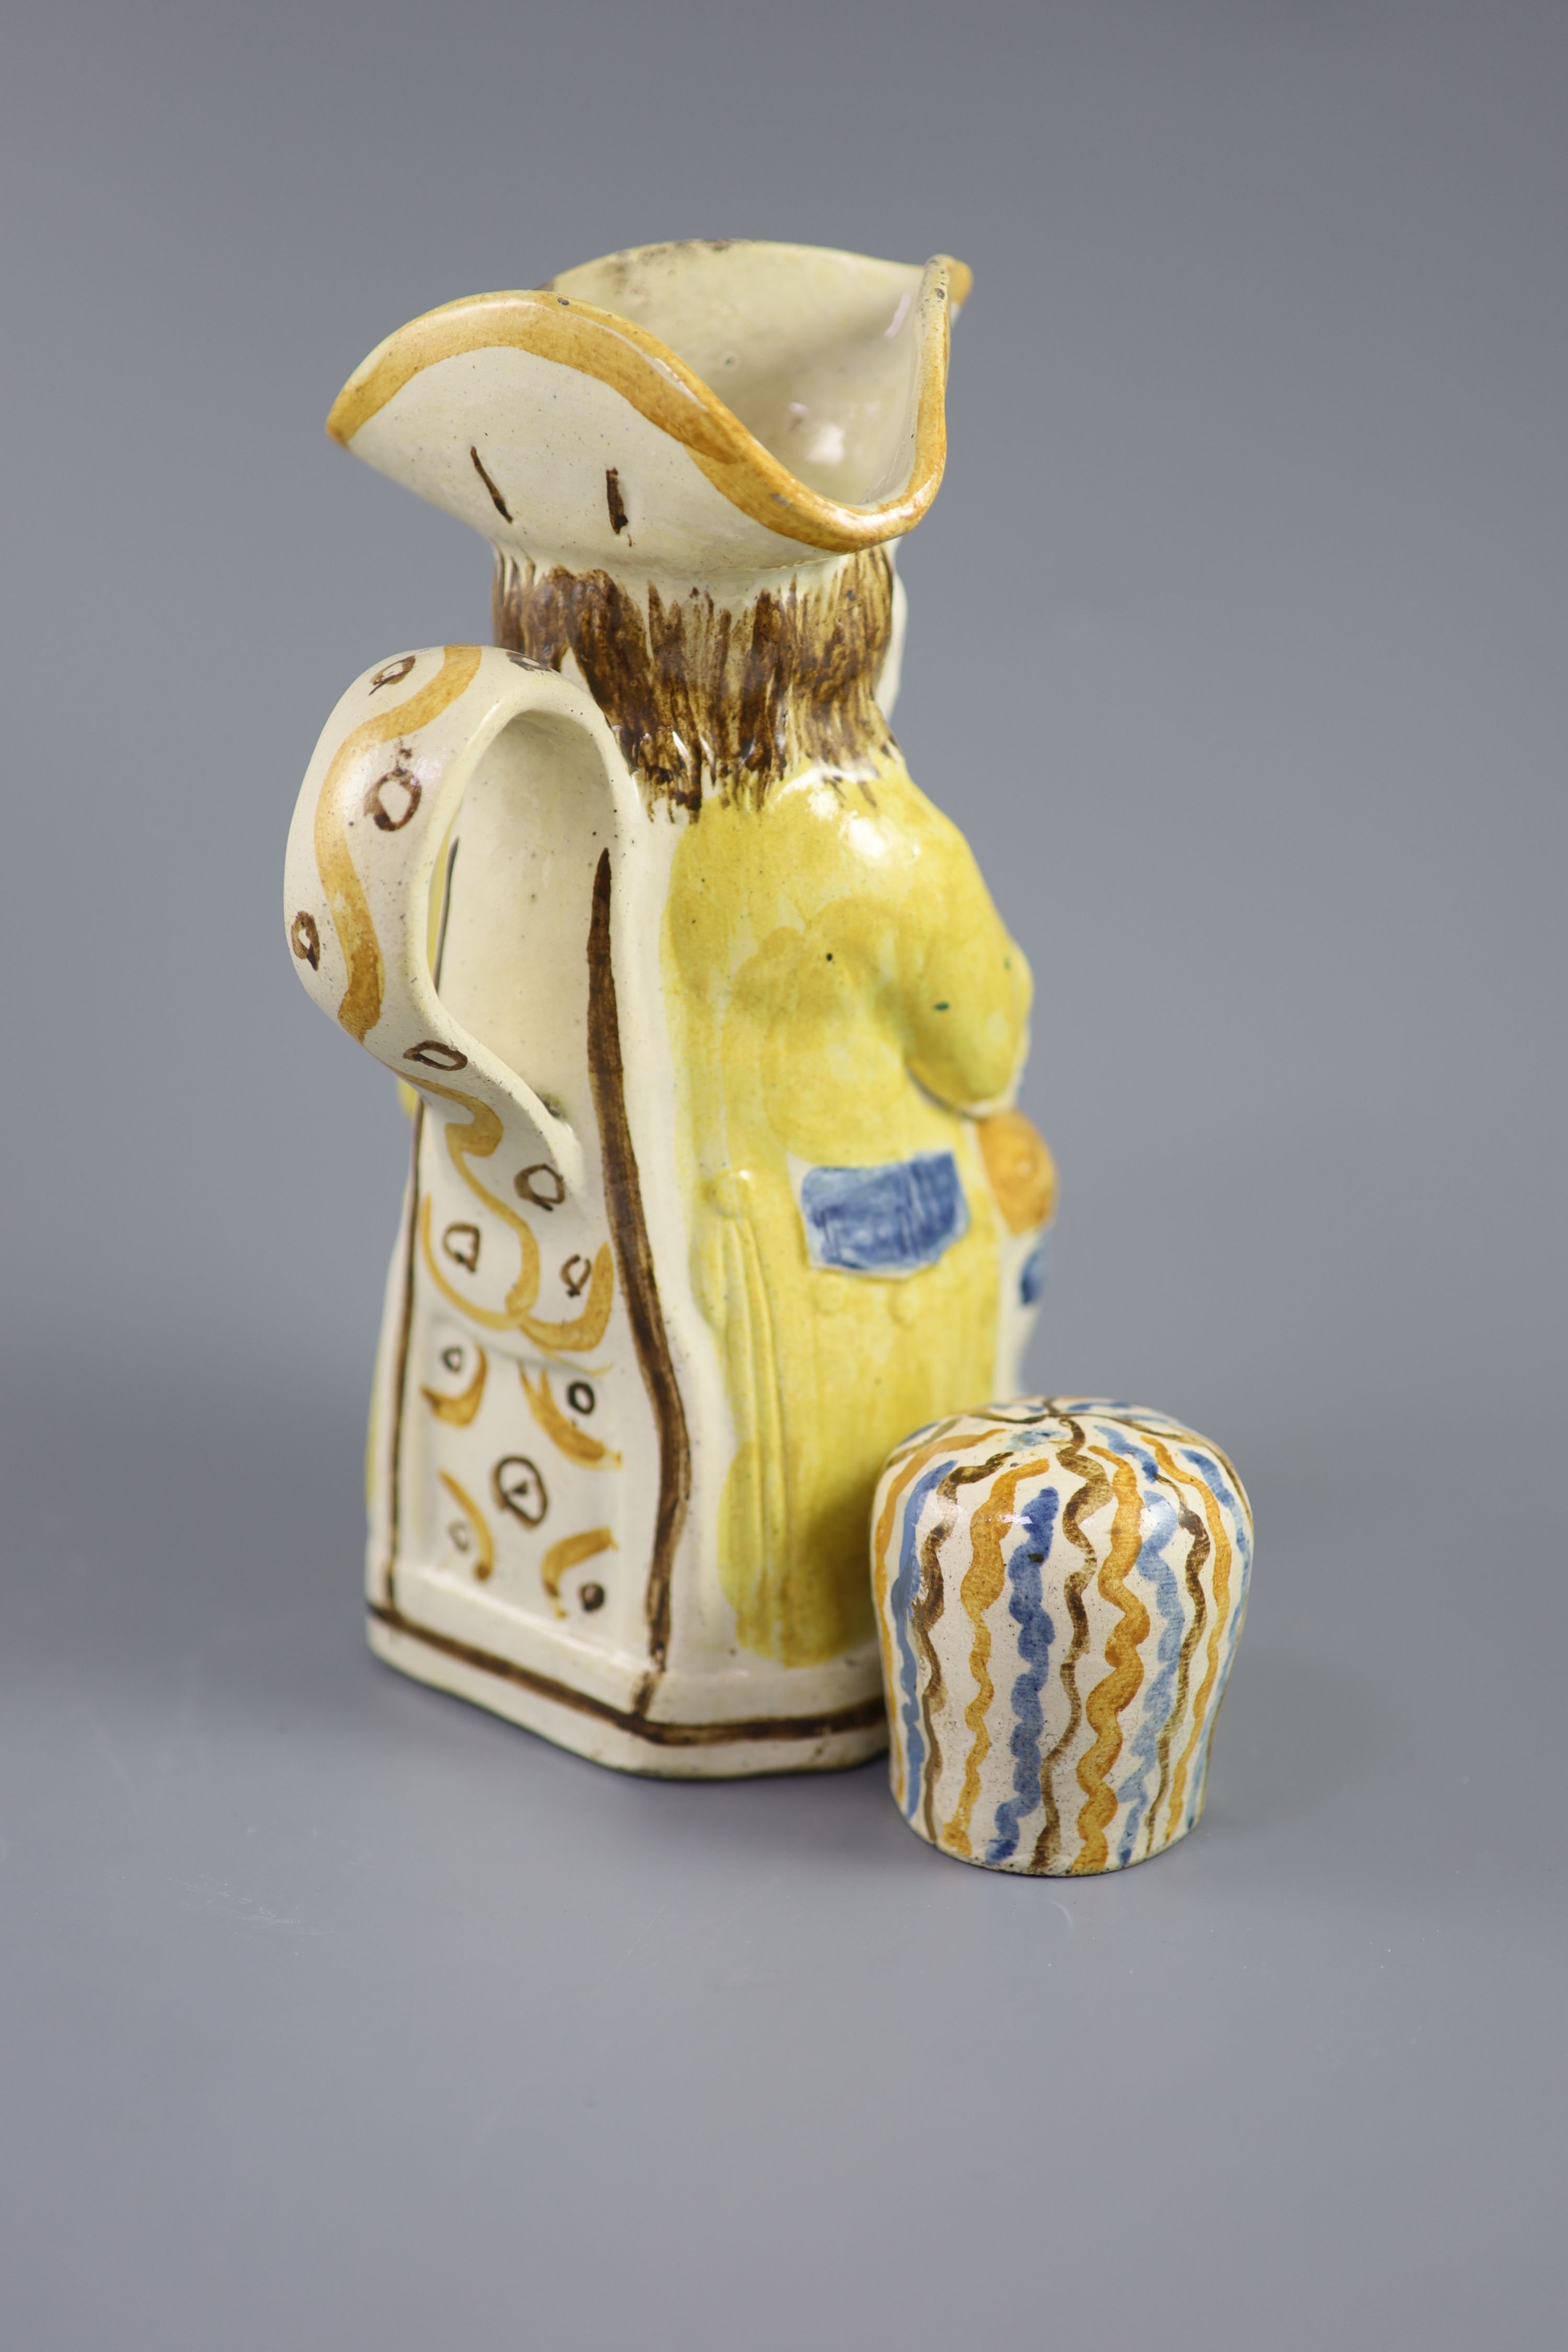 A Staffordshire Prattware Good Hearty Fellow Toby jug with rare hat measure, c.1790-1800, 25cm high